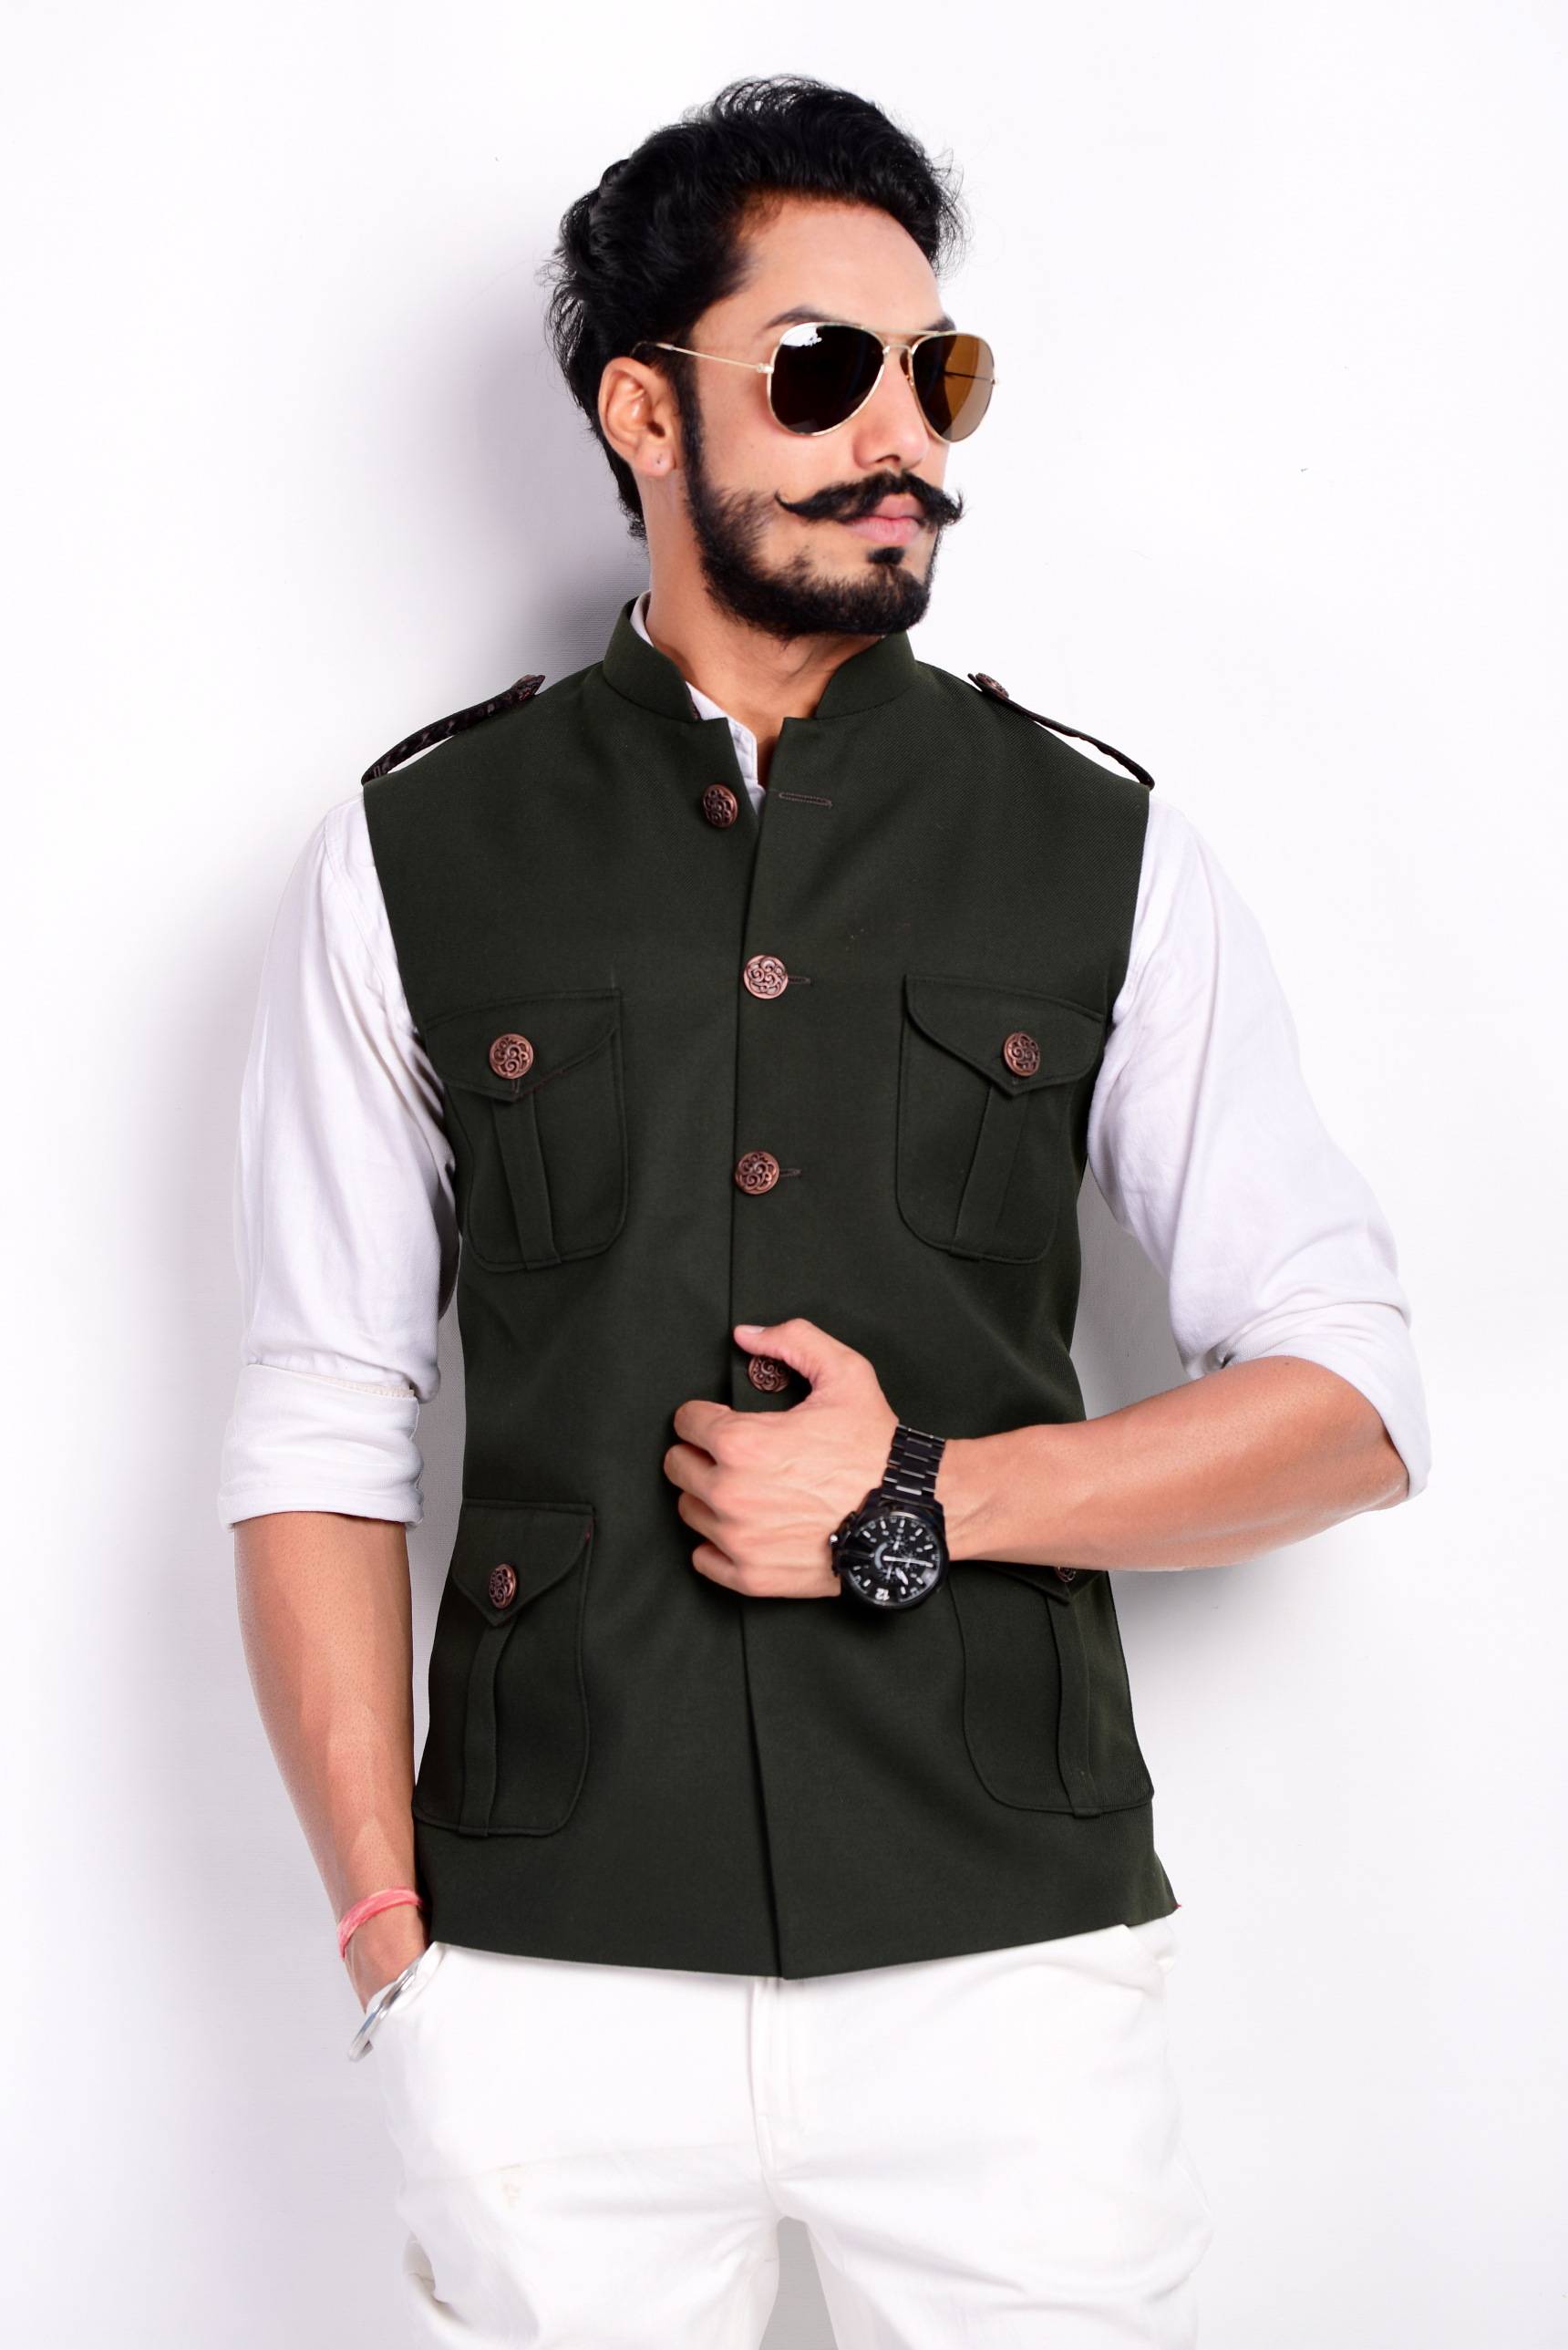 Stylish Dark Green Semi Hunting Jacket with White Shirt and Breeches| Perfect for Casual wear, Festive wear|